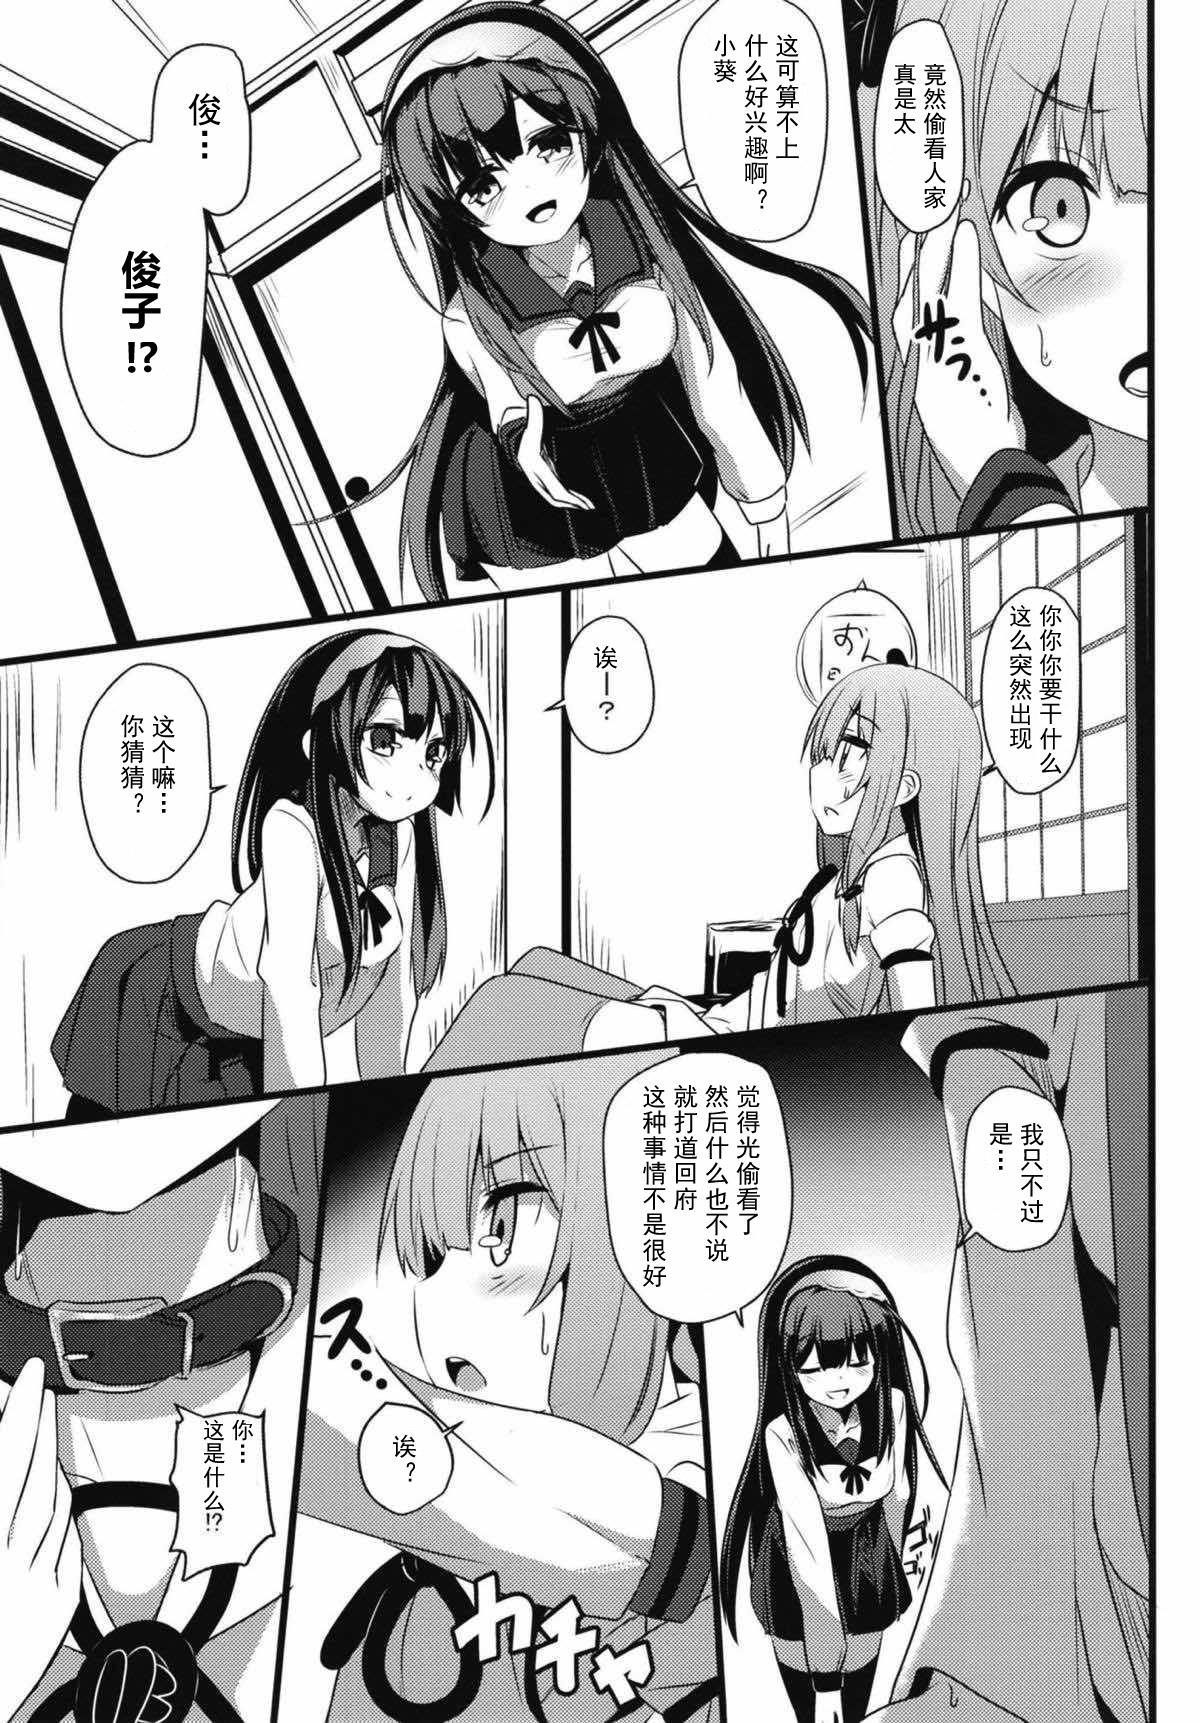 Gapes Gaping Asshole (Kotonoha's Festa 2) [Milk Pudding (Jamcy)] Akane-chan Challenge! 2.5-kaime (VOICEROID) [Chinese] [古早个人汉化] - Voiceroid Dad - Page 5